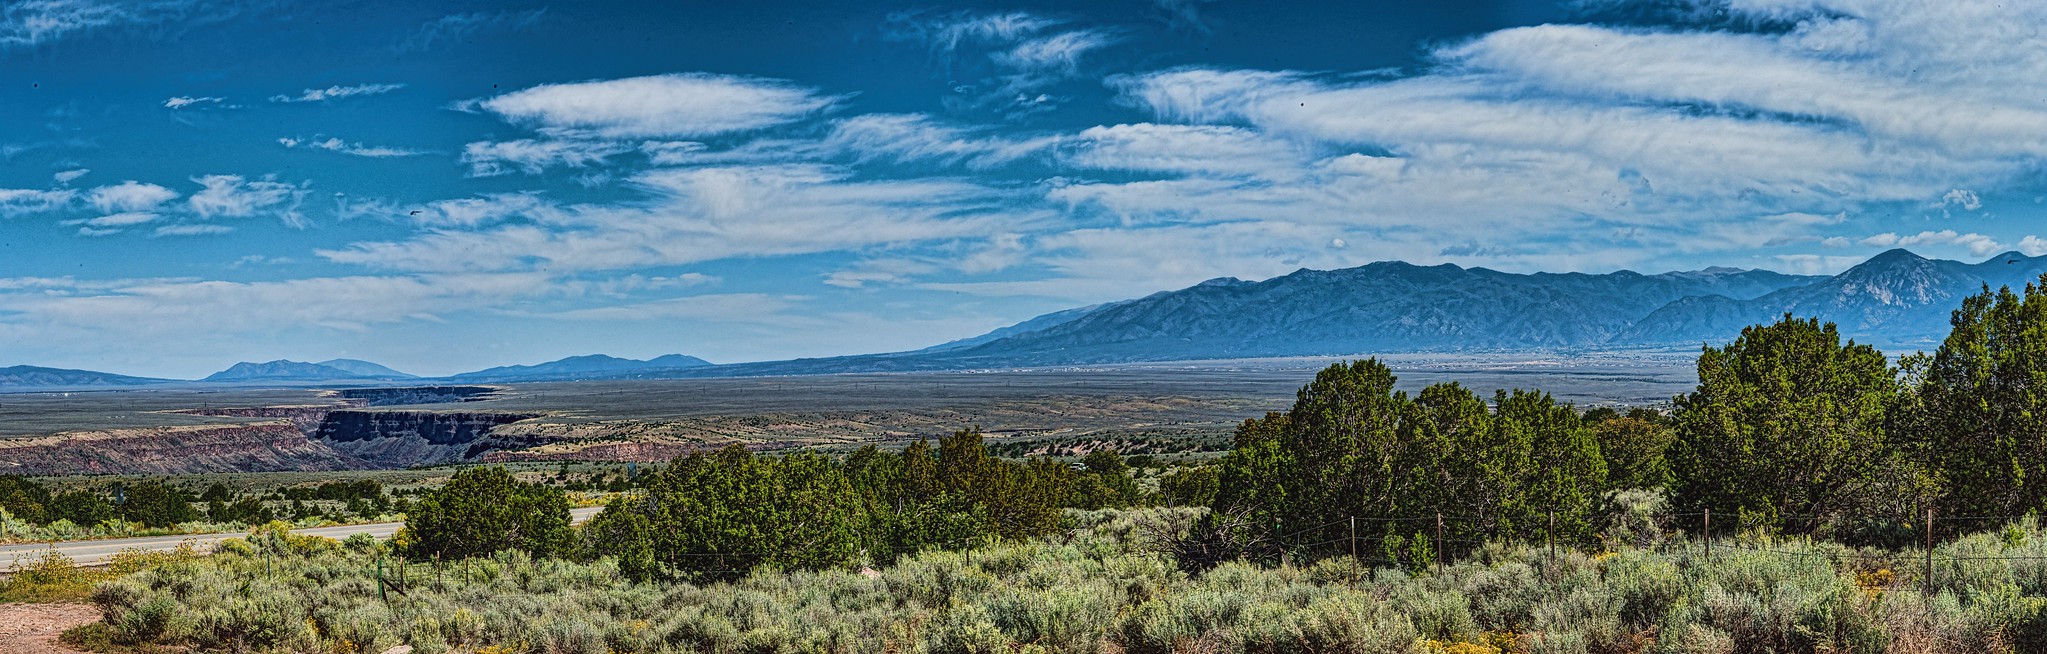 Taos New Mexico Panorama by Dave Hensley, CC 2.0 via Flicker